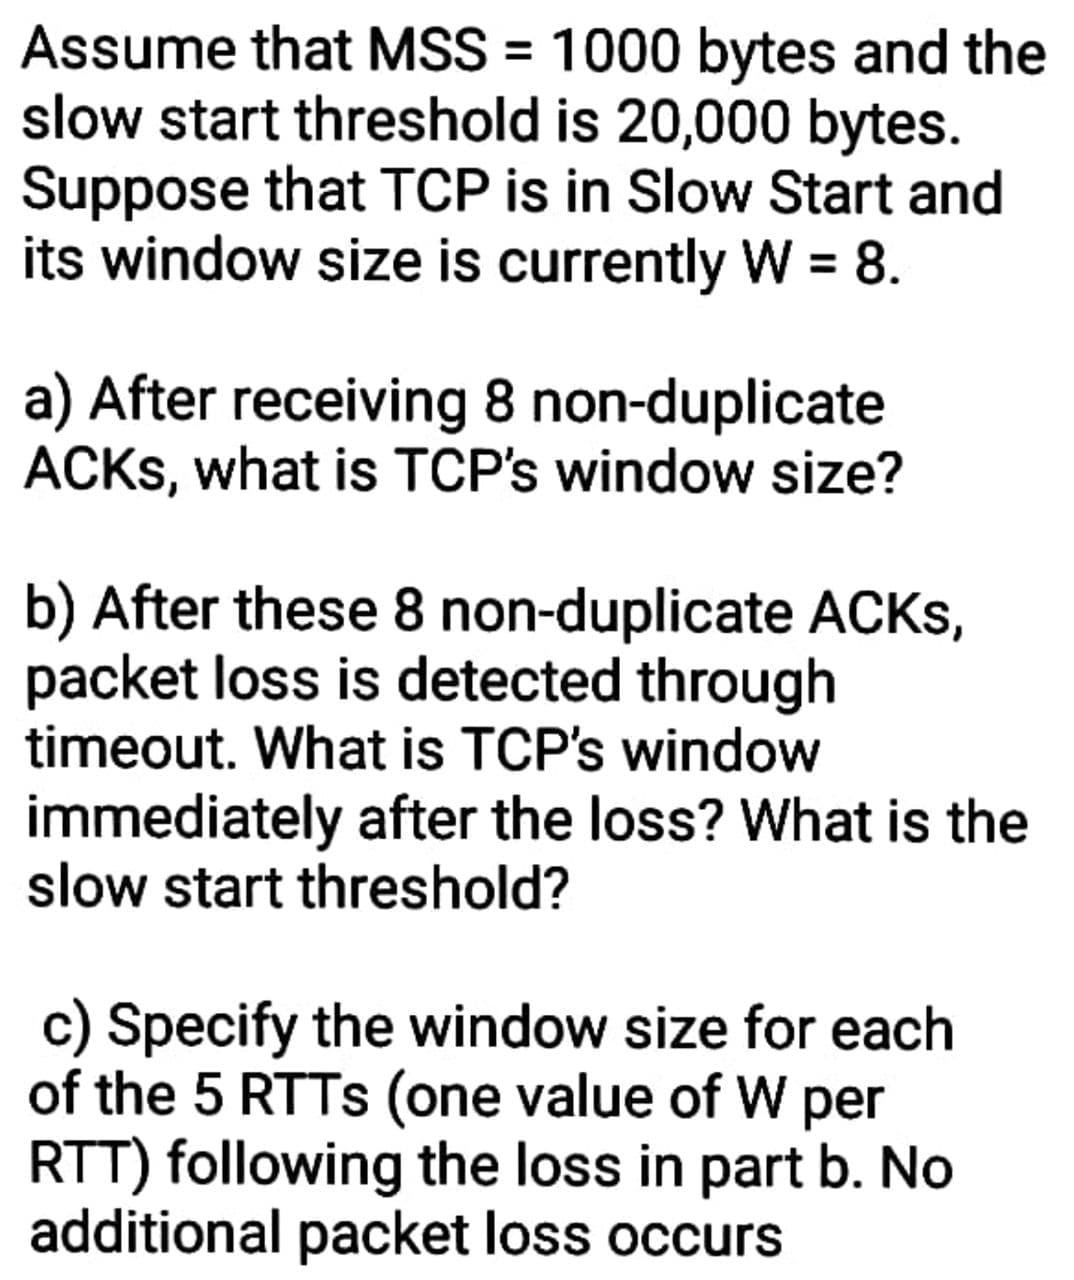 Assume that MSS = 1000 bytes and the
slow start threshold is 20,000 bytes.
Suppose that TCP is in Slow Start and
its window size is currently W = 8.
a) After receiving 8 non-duplicate
ACKS, what is TCP's window size?
b) After these 8 non-duplicate ACKS,
packet loss is detected through
timeout. What is TCP's window
immediately after the loss? What is the
slow start threshold?
c) Specify the window size for each
of the 5 RTTS (one value of W per
RTT) following the loss in part b. No
additional packet loss occurs
